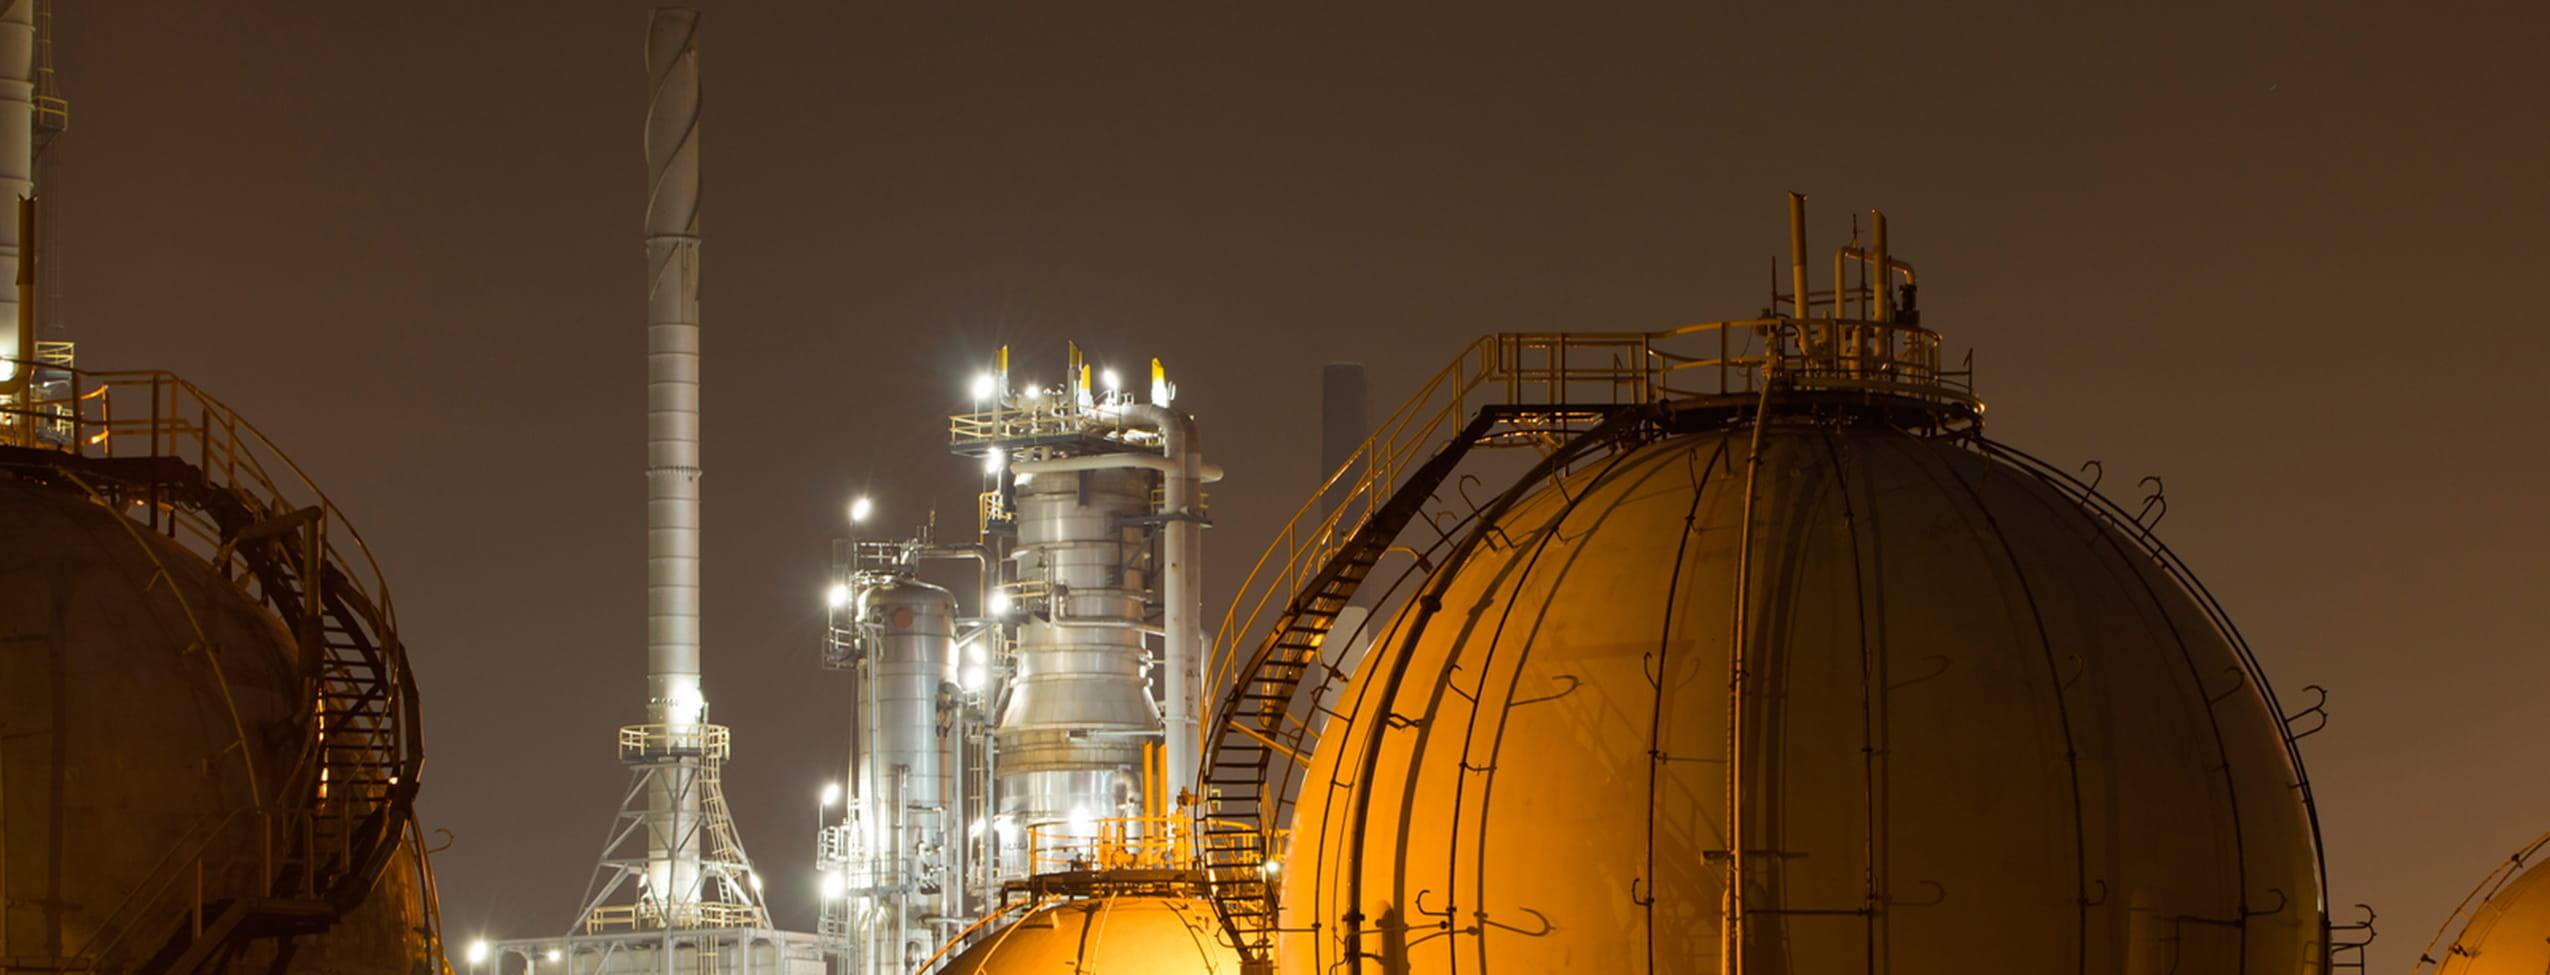 Liquefied_Natural_Gas_Storage_Tanks_S_2078